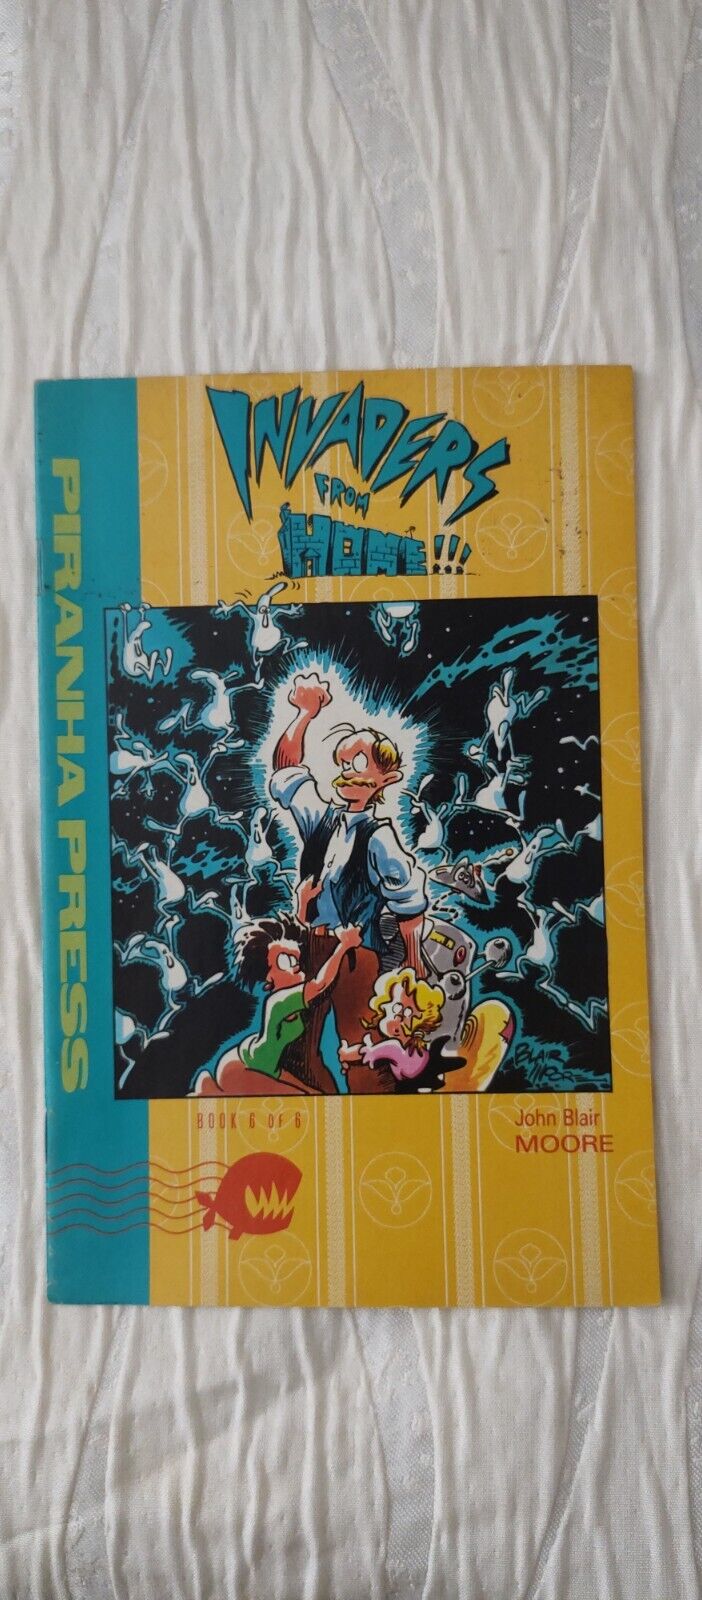 Cb21~comic book~rare waders from home book 6 of 6